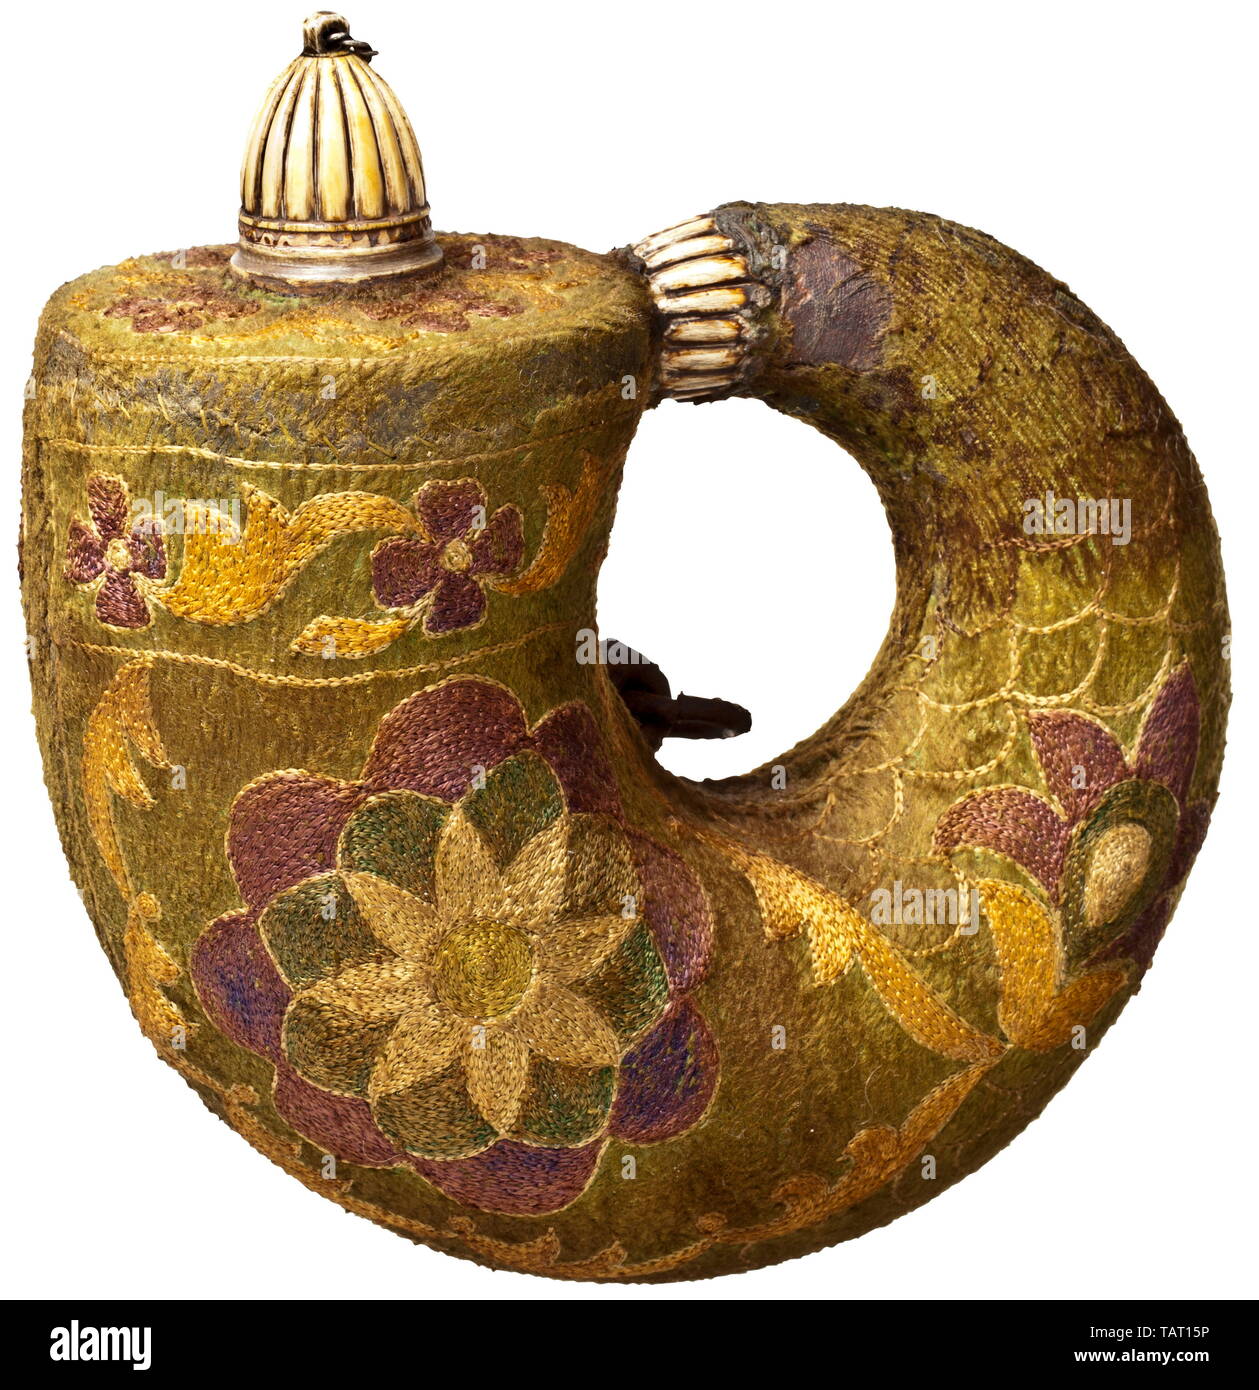 An Indian cloth-covered powder horn (Barutdan), 18th century, Nautilus-shaped wooden body, covered entirely with florally embroidered felt. Carved spout and stopper of ivory, two iron carrying rings (with flash rust). Width 19 cm. Similar pieces are exhibited in the Salar Jung Museum, Hyderabad. historic, historical, Additional-Rights-Clearance-Info-Not-Available Stock Photo